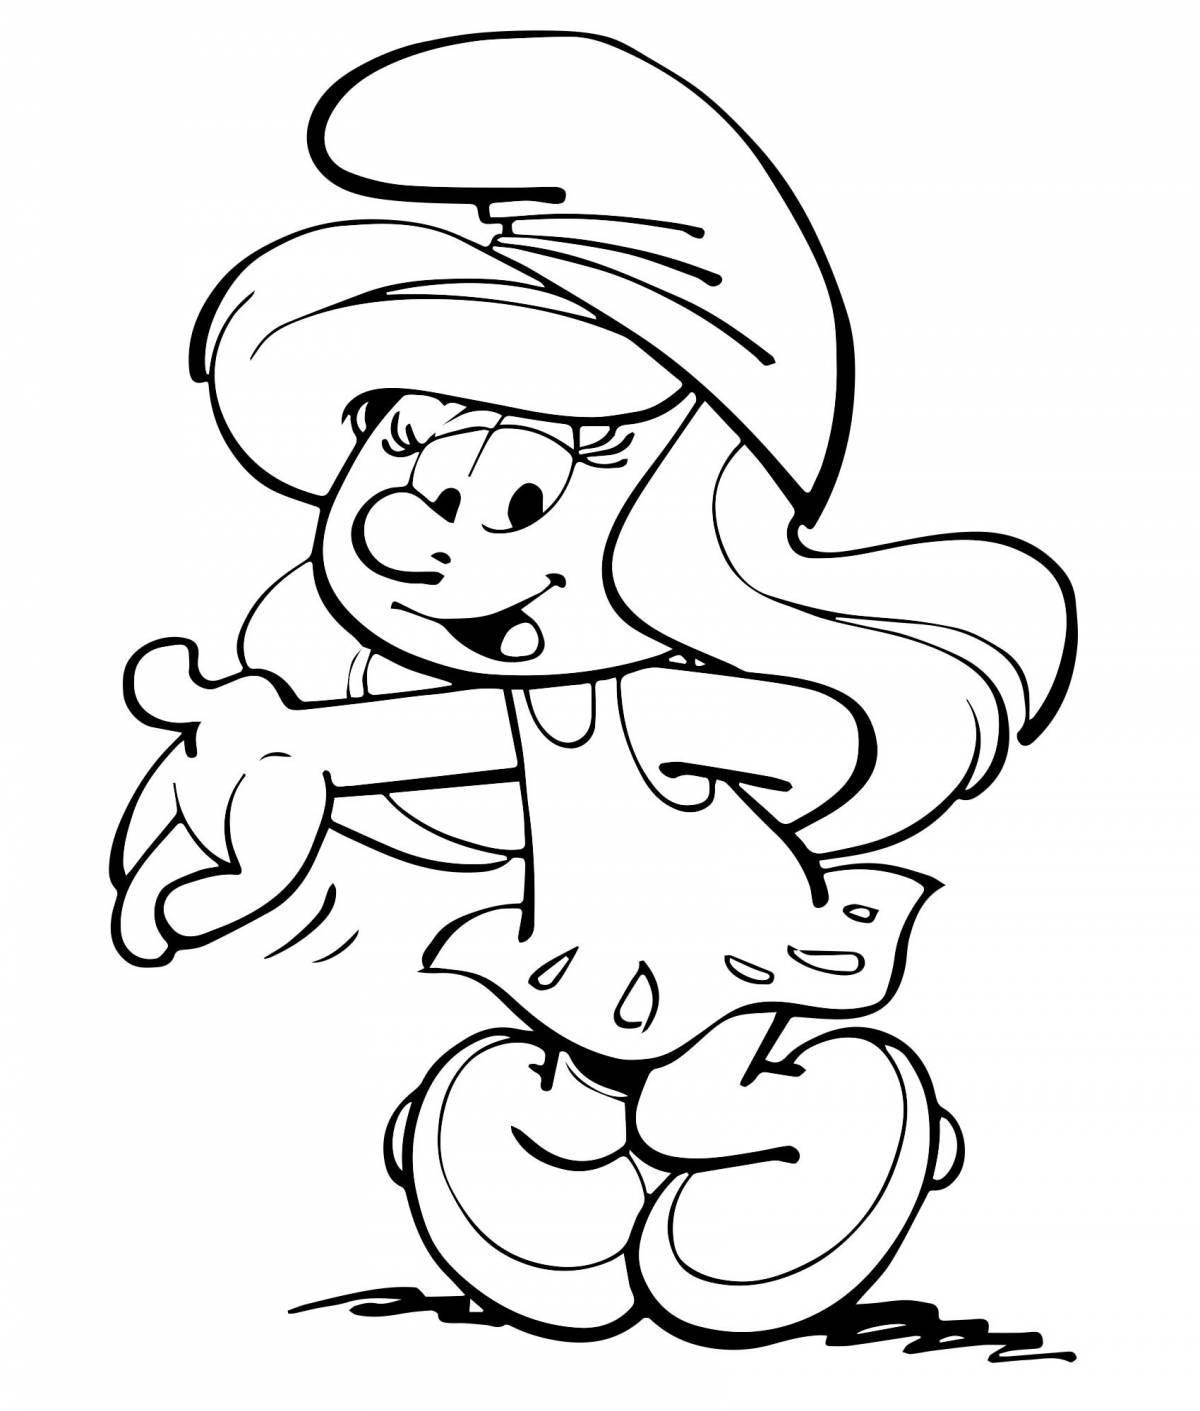 Smurfette style coloring book